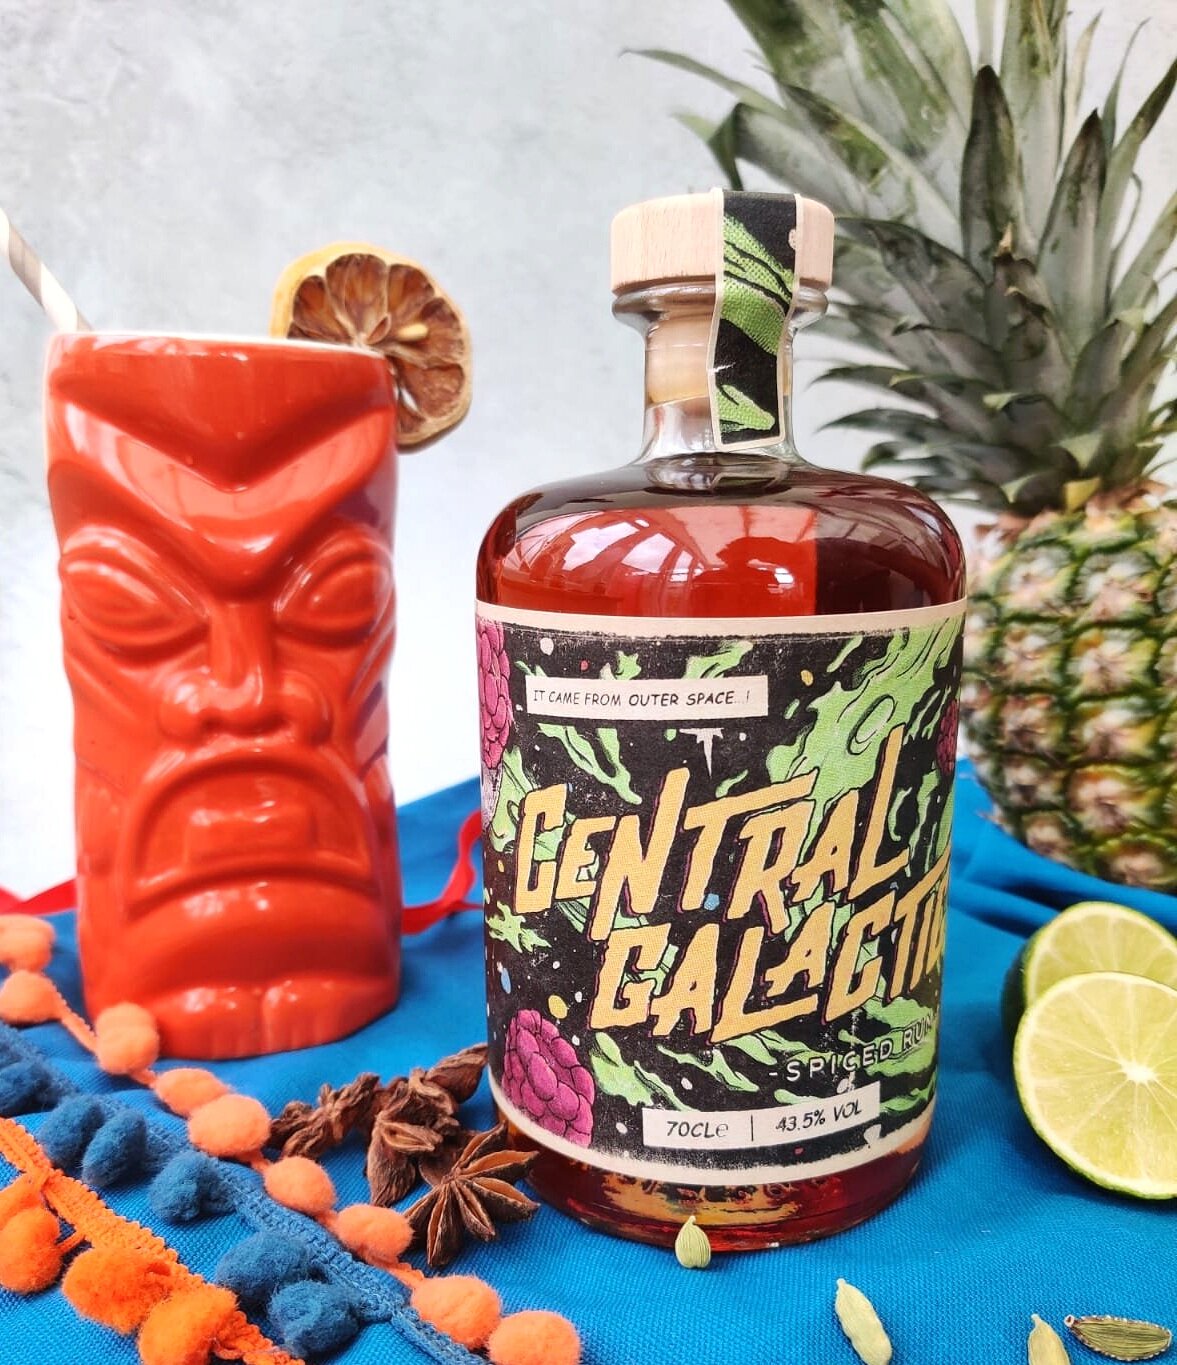 central galactic spiced rum cocktail recipe